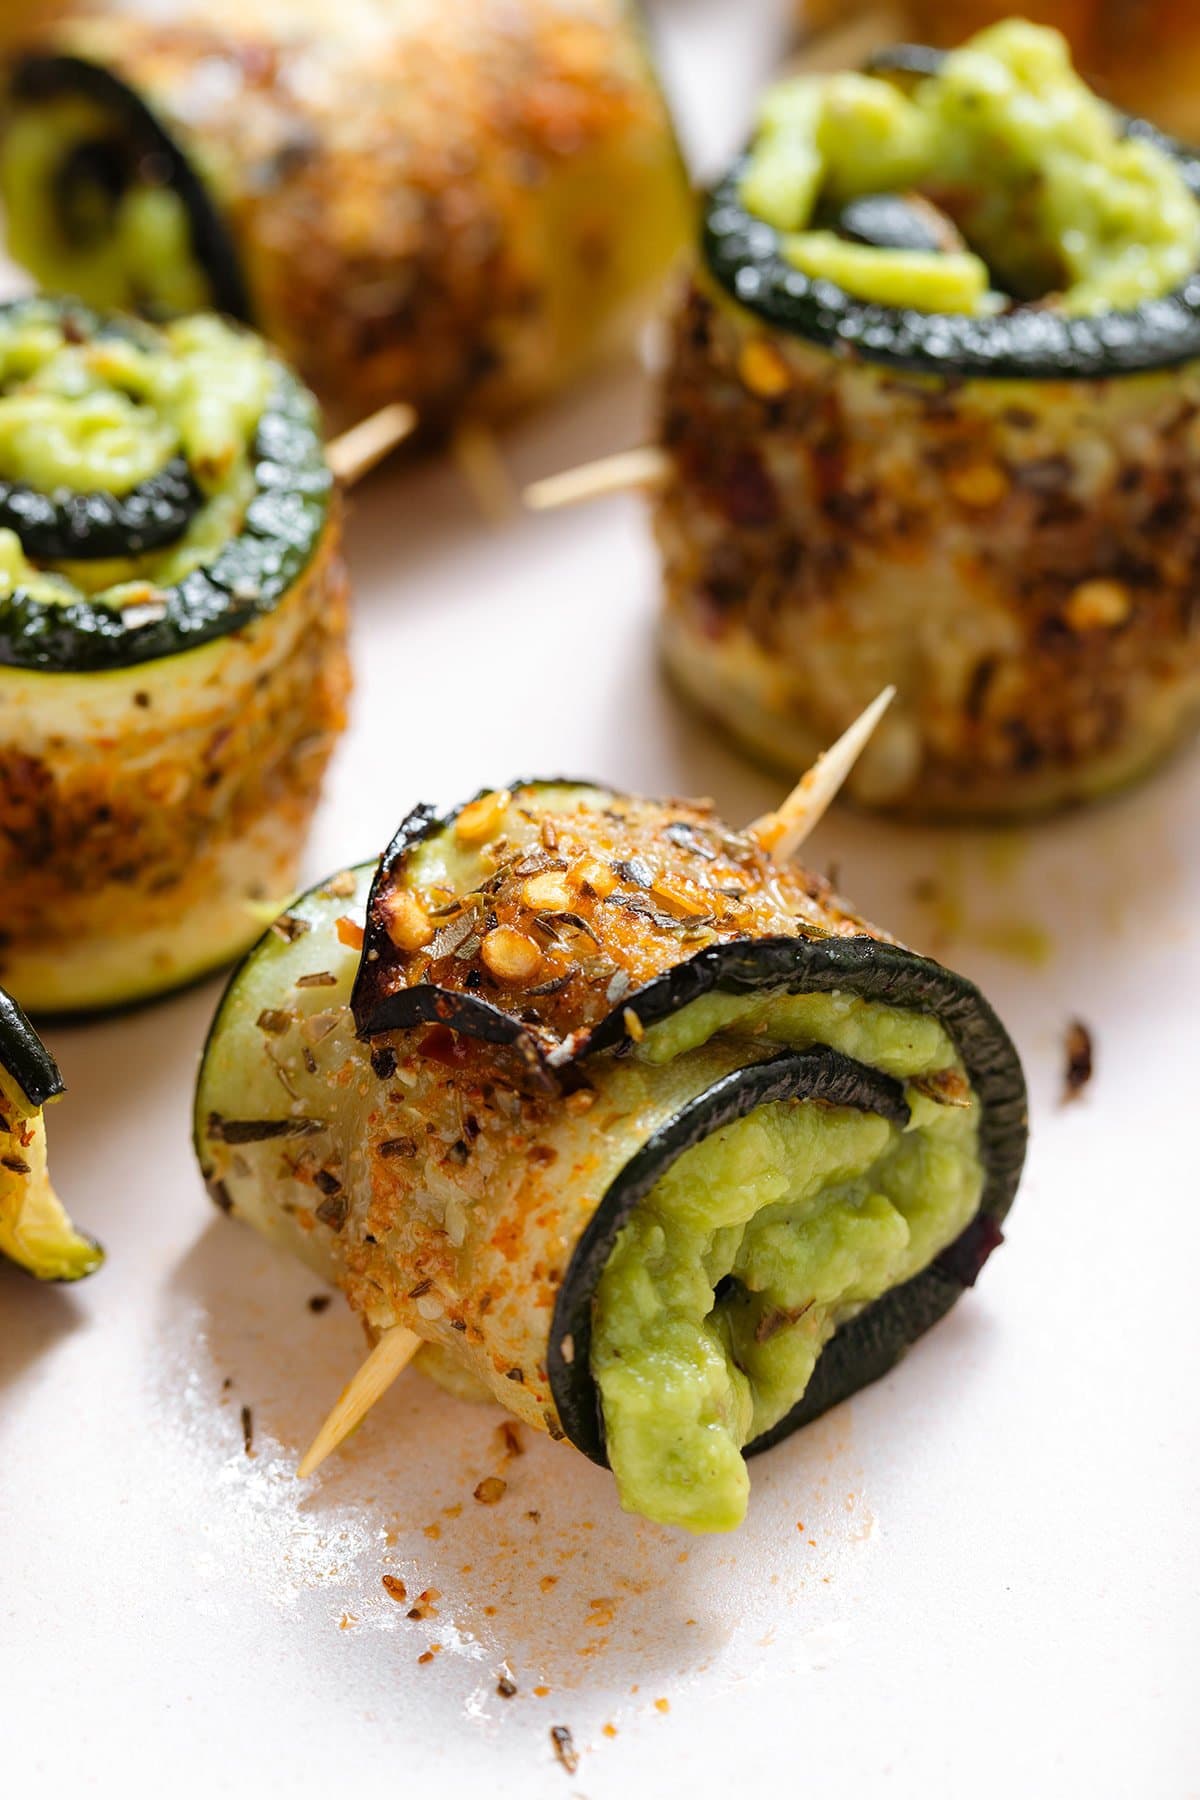 Roasted zucchini rolls with lots of spices stuffed with guacamole and secured with a toothpick on a light pink plate.